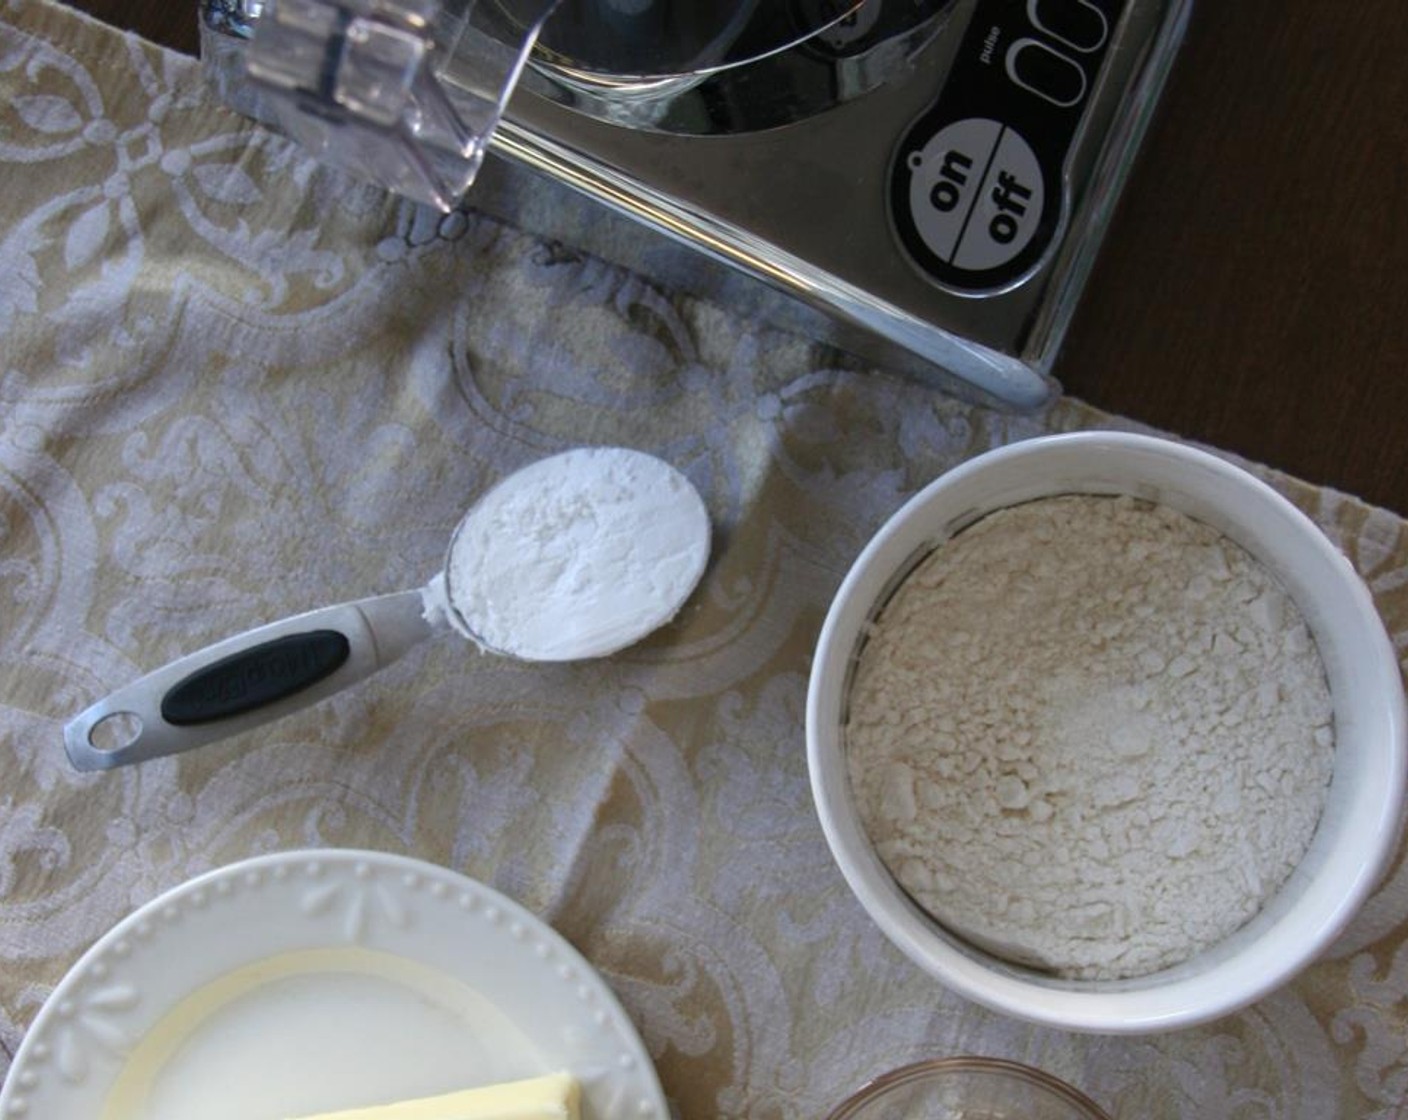 step 2 Mix Unsalted Butter (1/2 cup), Powdered Confectioners Sugar (1/4 cup) and Vanilla Extract (1/2 tsp) in a large bowl.